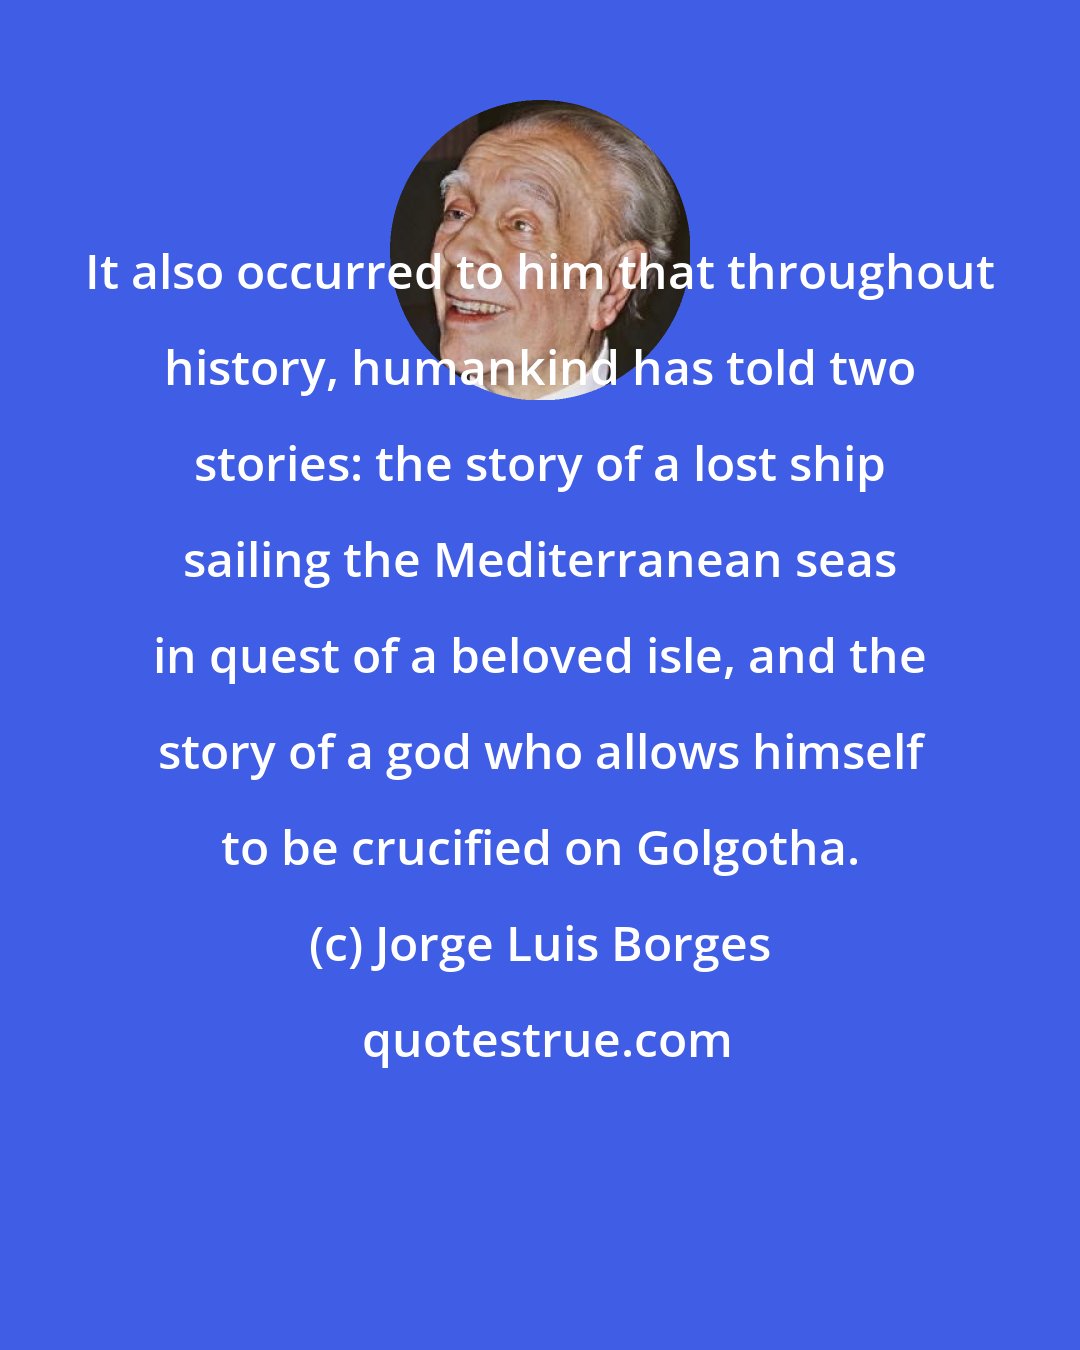 Jorge Luis Borges: It also occurred to him that throughout history, humankind has told two stories: the story of a lost ship sailing the Mediterranean seas in quest of a beloved isle, and the story of a god who allows himself to be crucified on Golgotha.